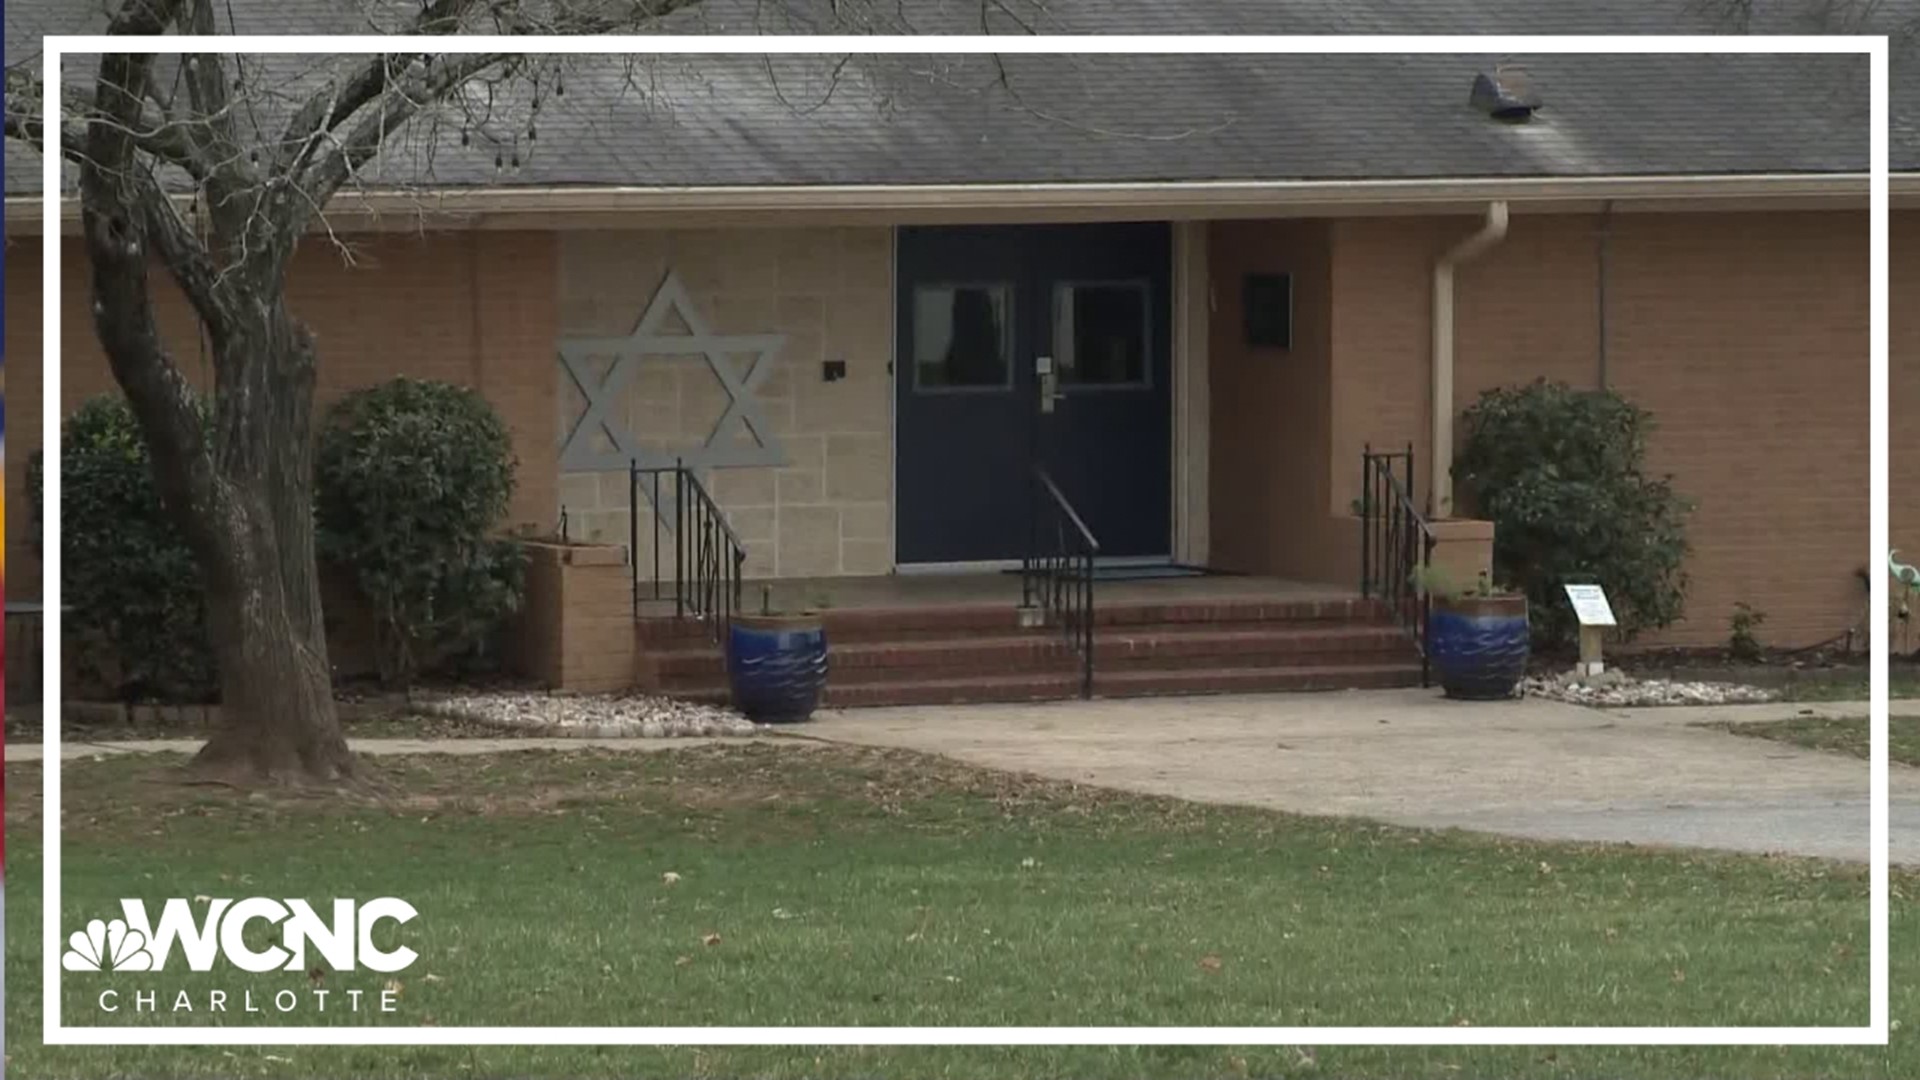 Authorities are investigating a bomb threat made against a Davidson synagogue